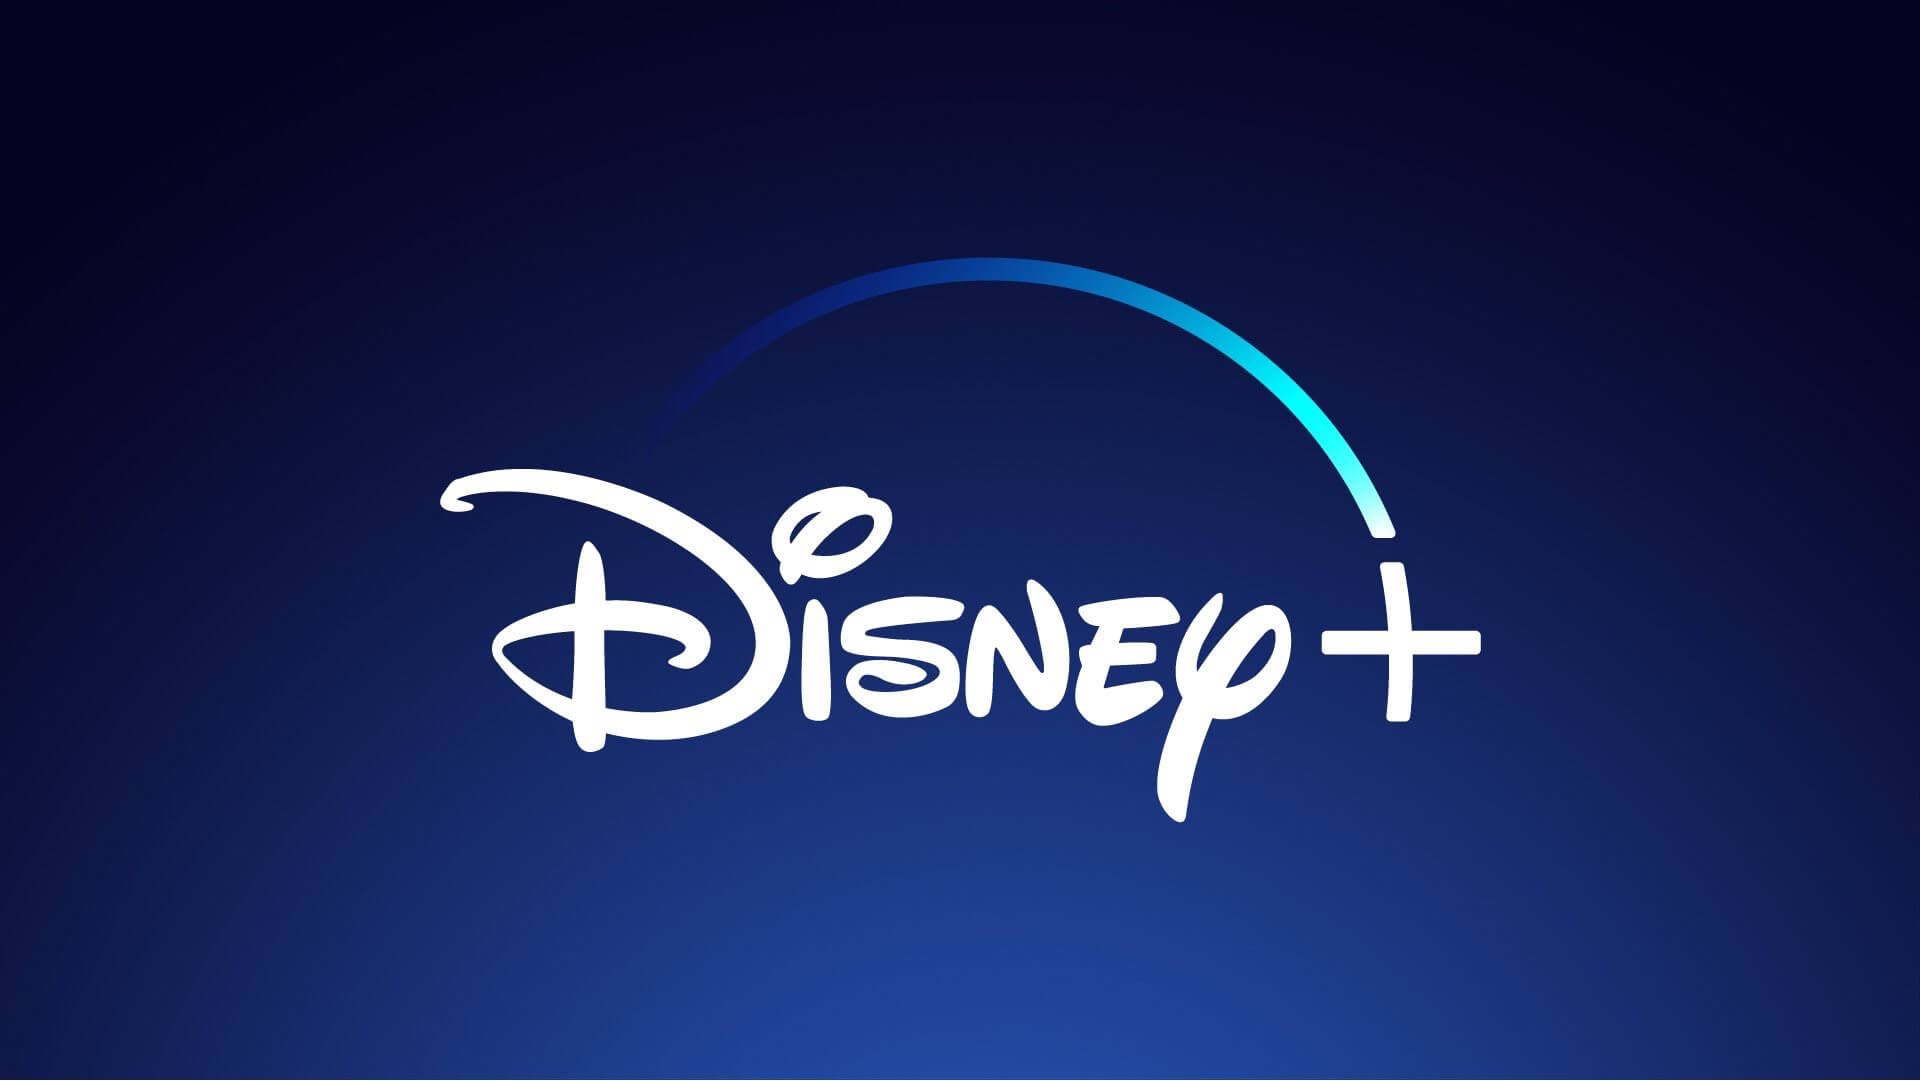 Disney CEO Bob Iger Confirms Streaming Service Is Titled Disney Plus